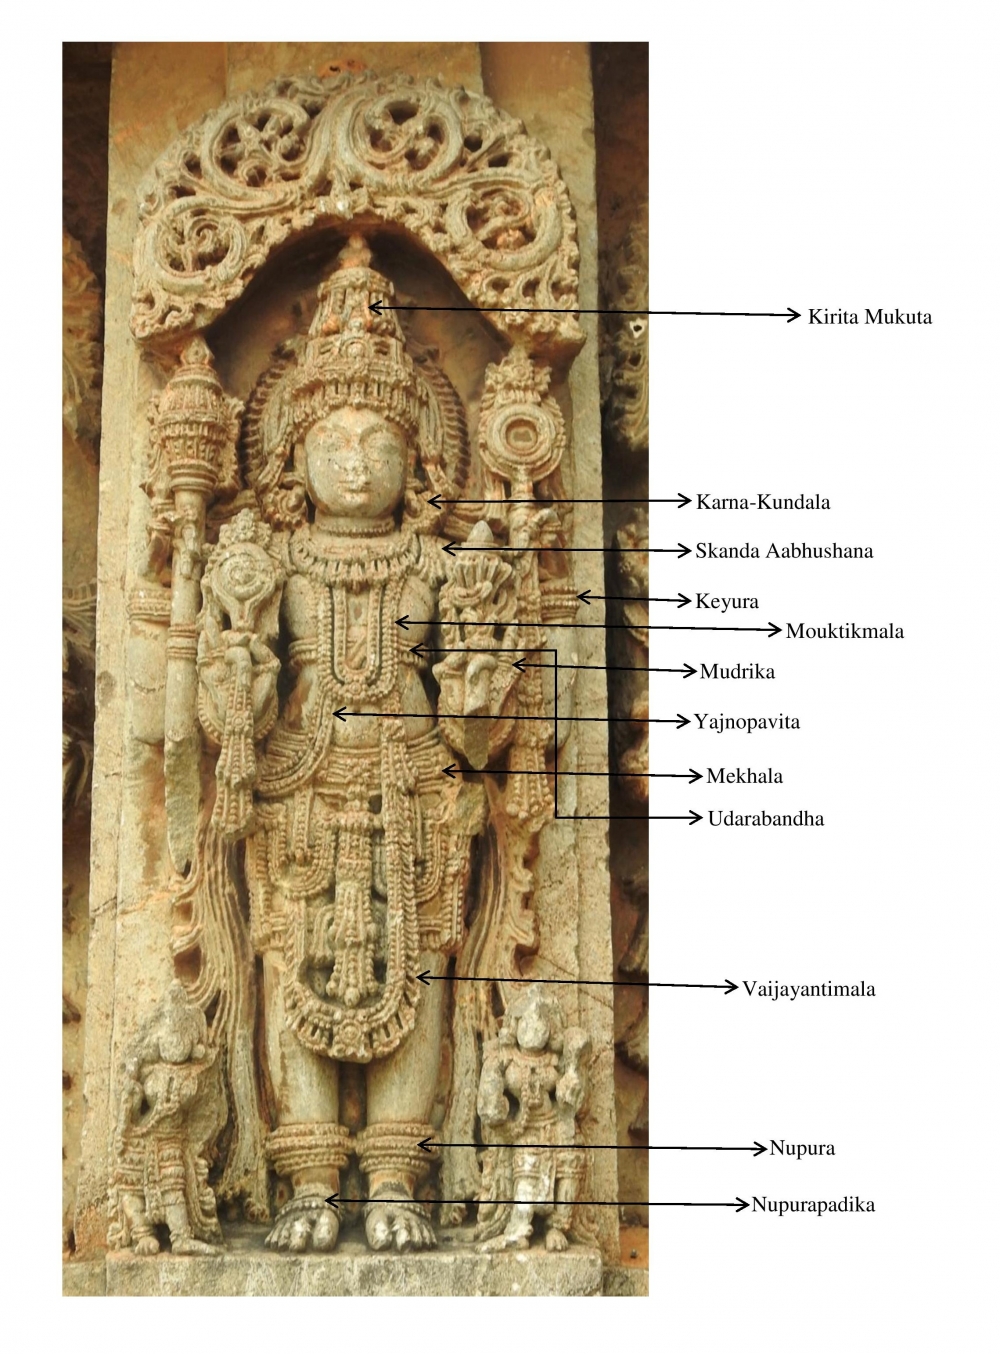 Fig. 3: A sculpture of Janardana, a chaturvimshati form of Lord Vishnu, with his principle attributes. He is bedecked with various ornaments (Courtesy: Poorva Arun Salvi)